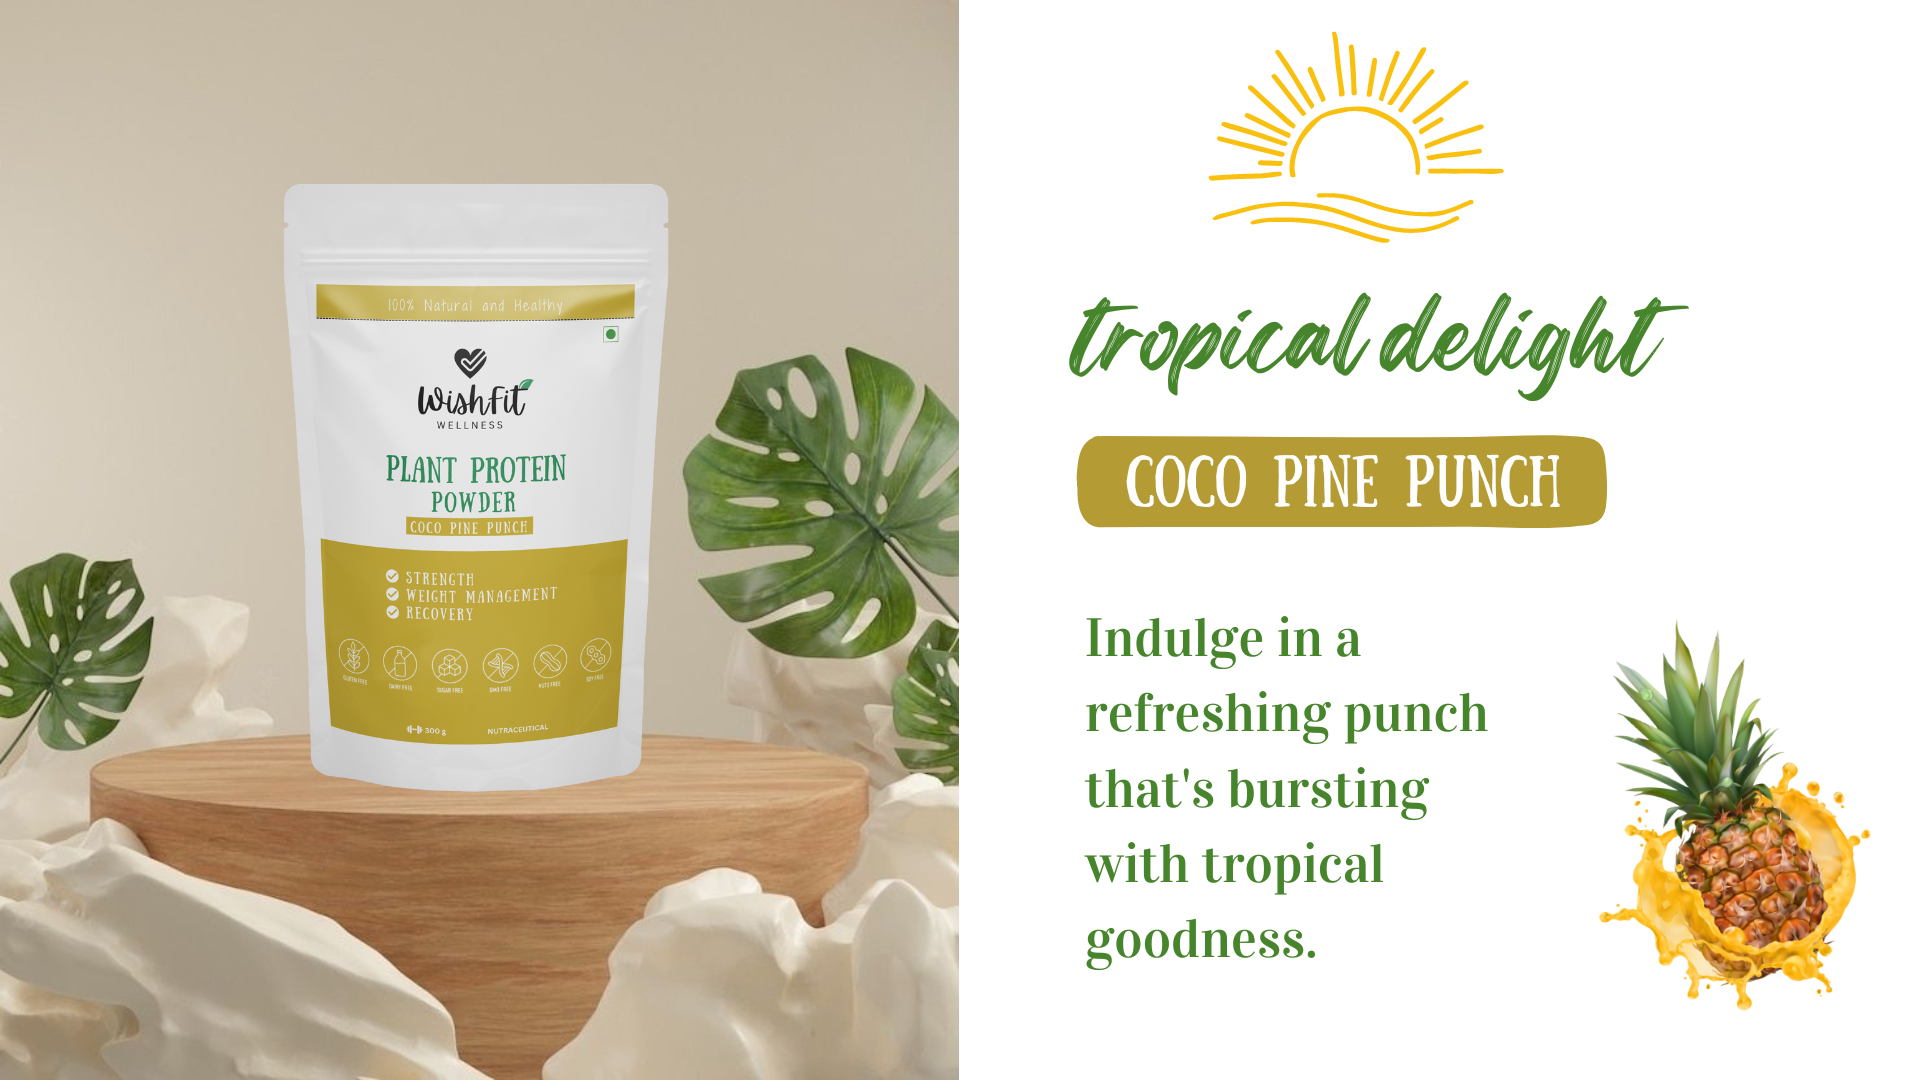 WishFit Coco Pine Punch is Best Tropical Flavor